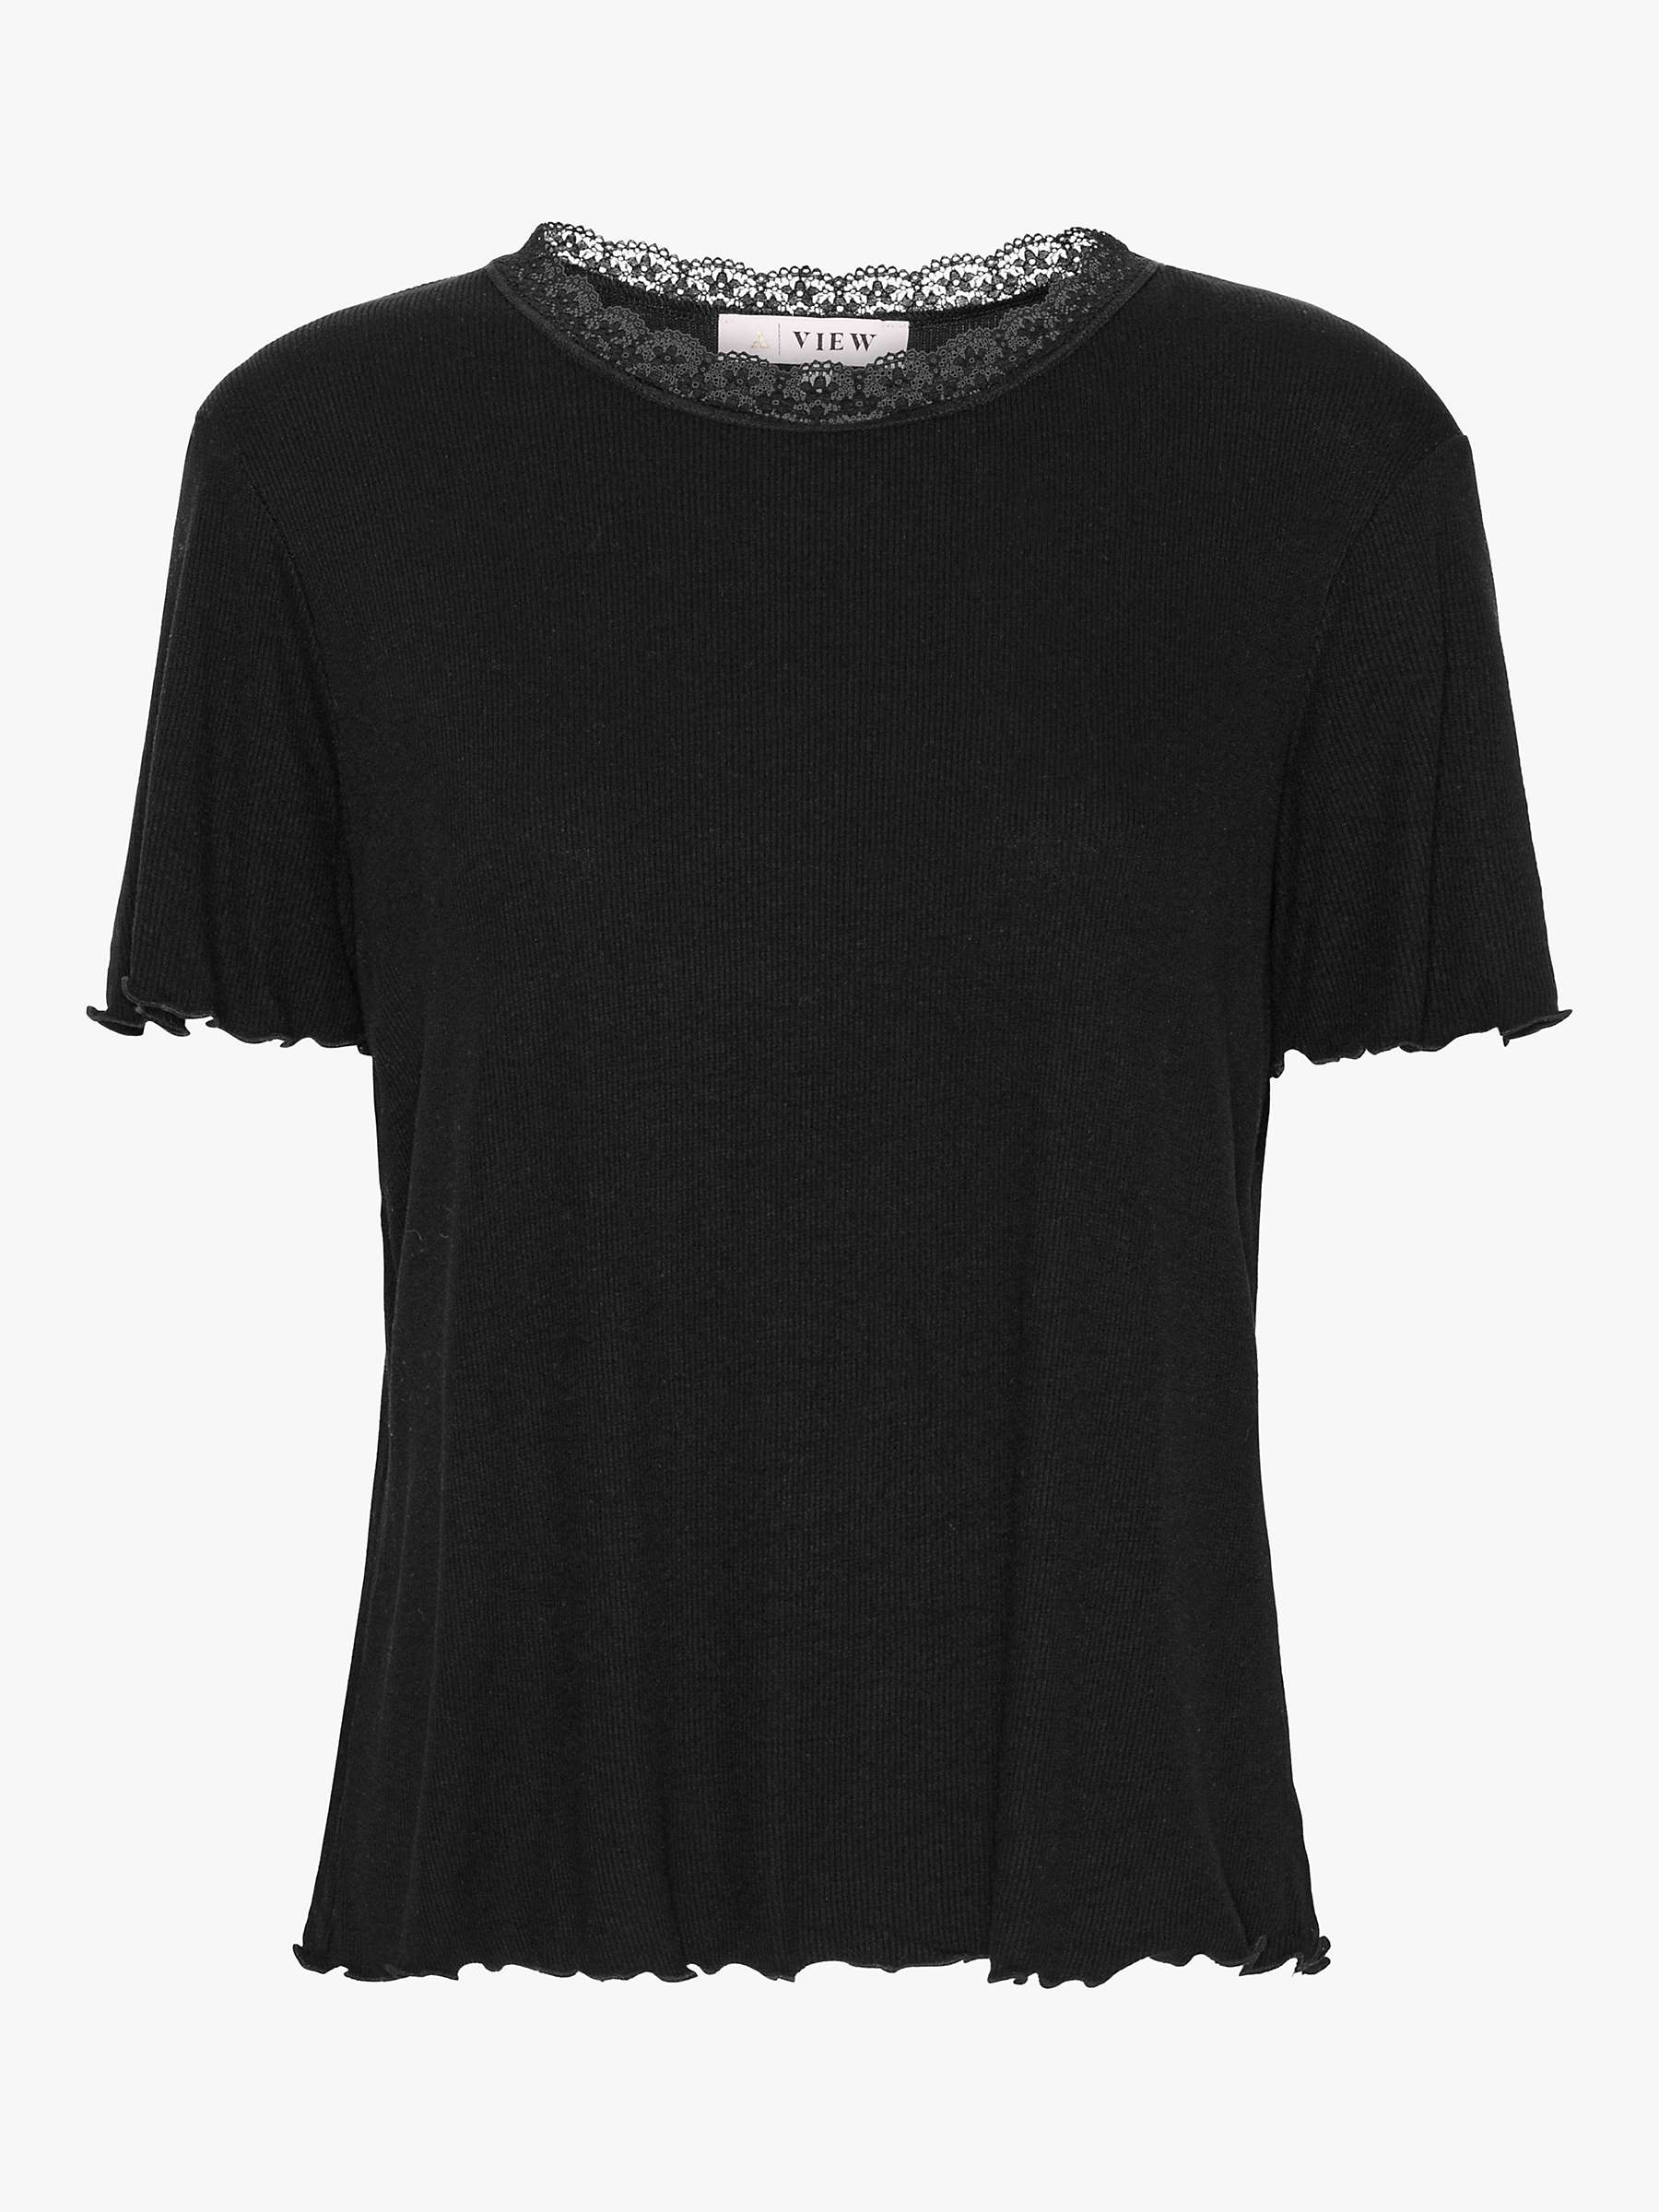 Buy A-VIEW Florine Short Sleeve Lace Neck Top Online at johnlewis.com